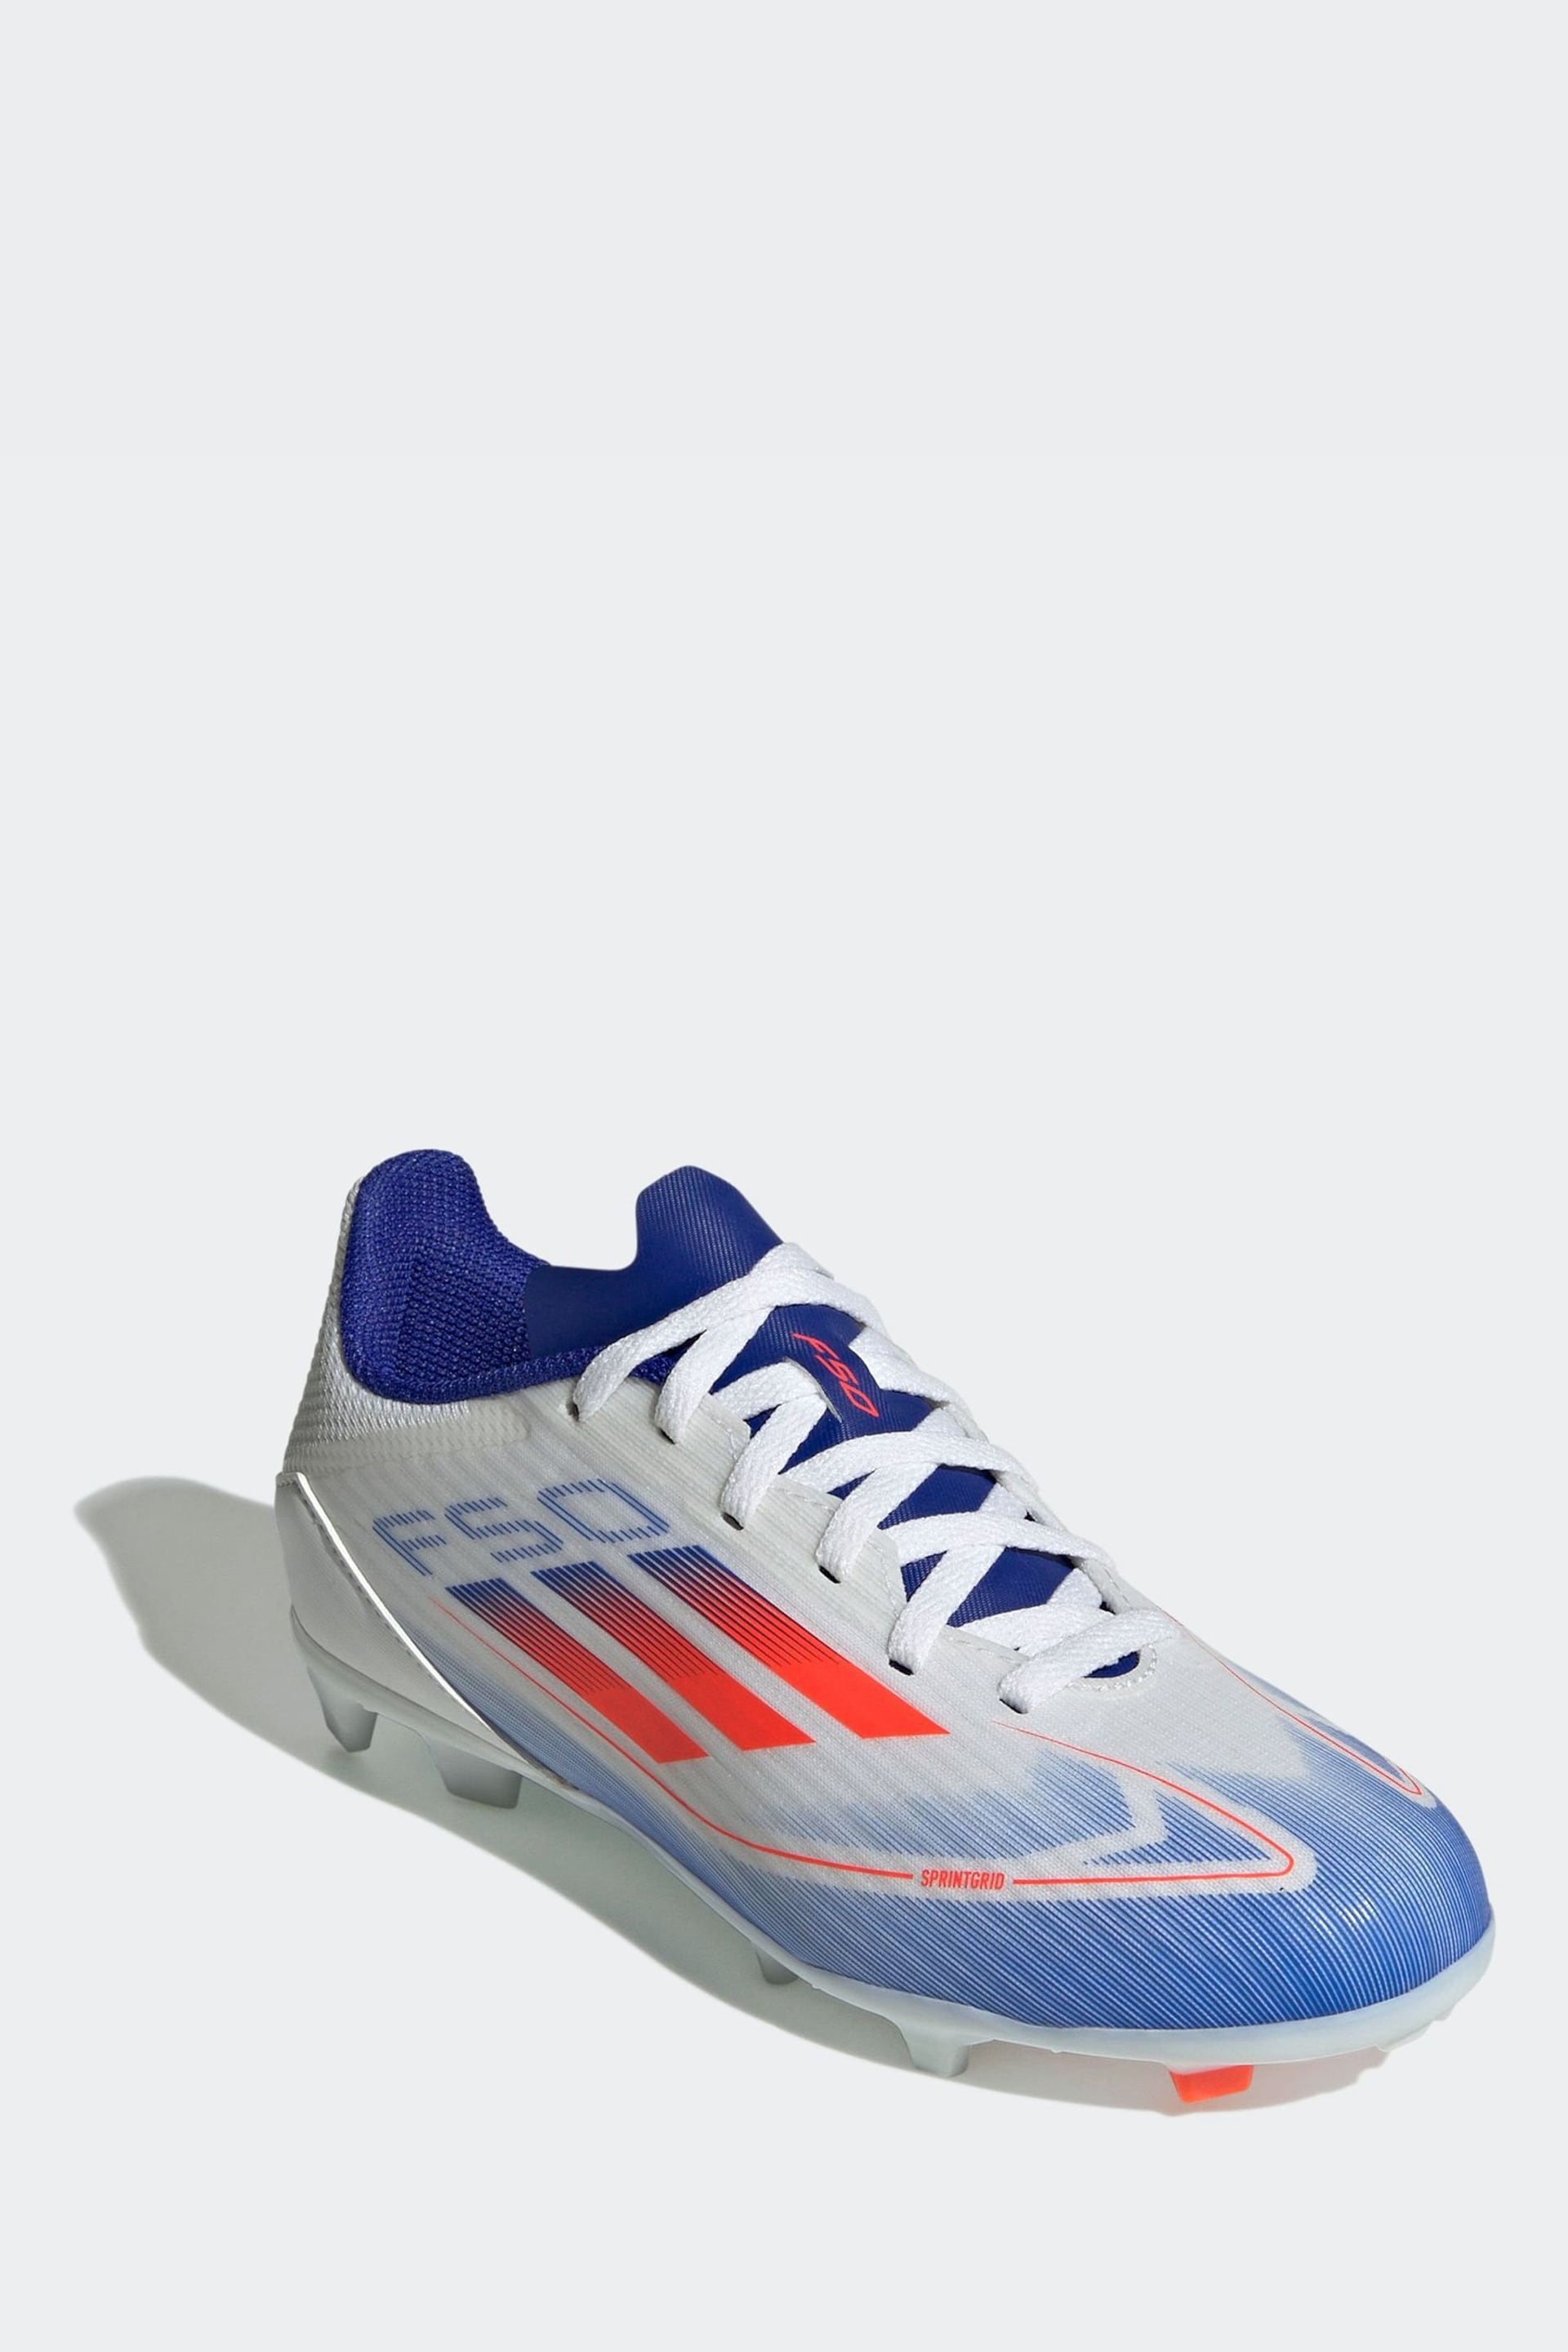 adidas White/Blue/Red Kids F50 League Firm/Multi-Ground Cleats Boots - Image 9 of 11